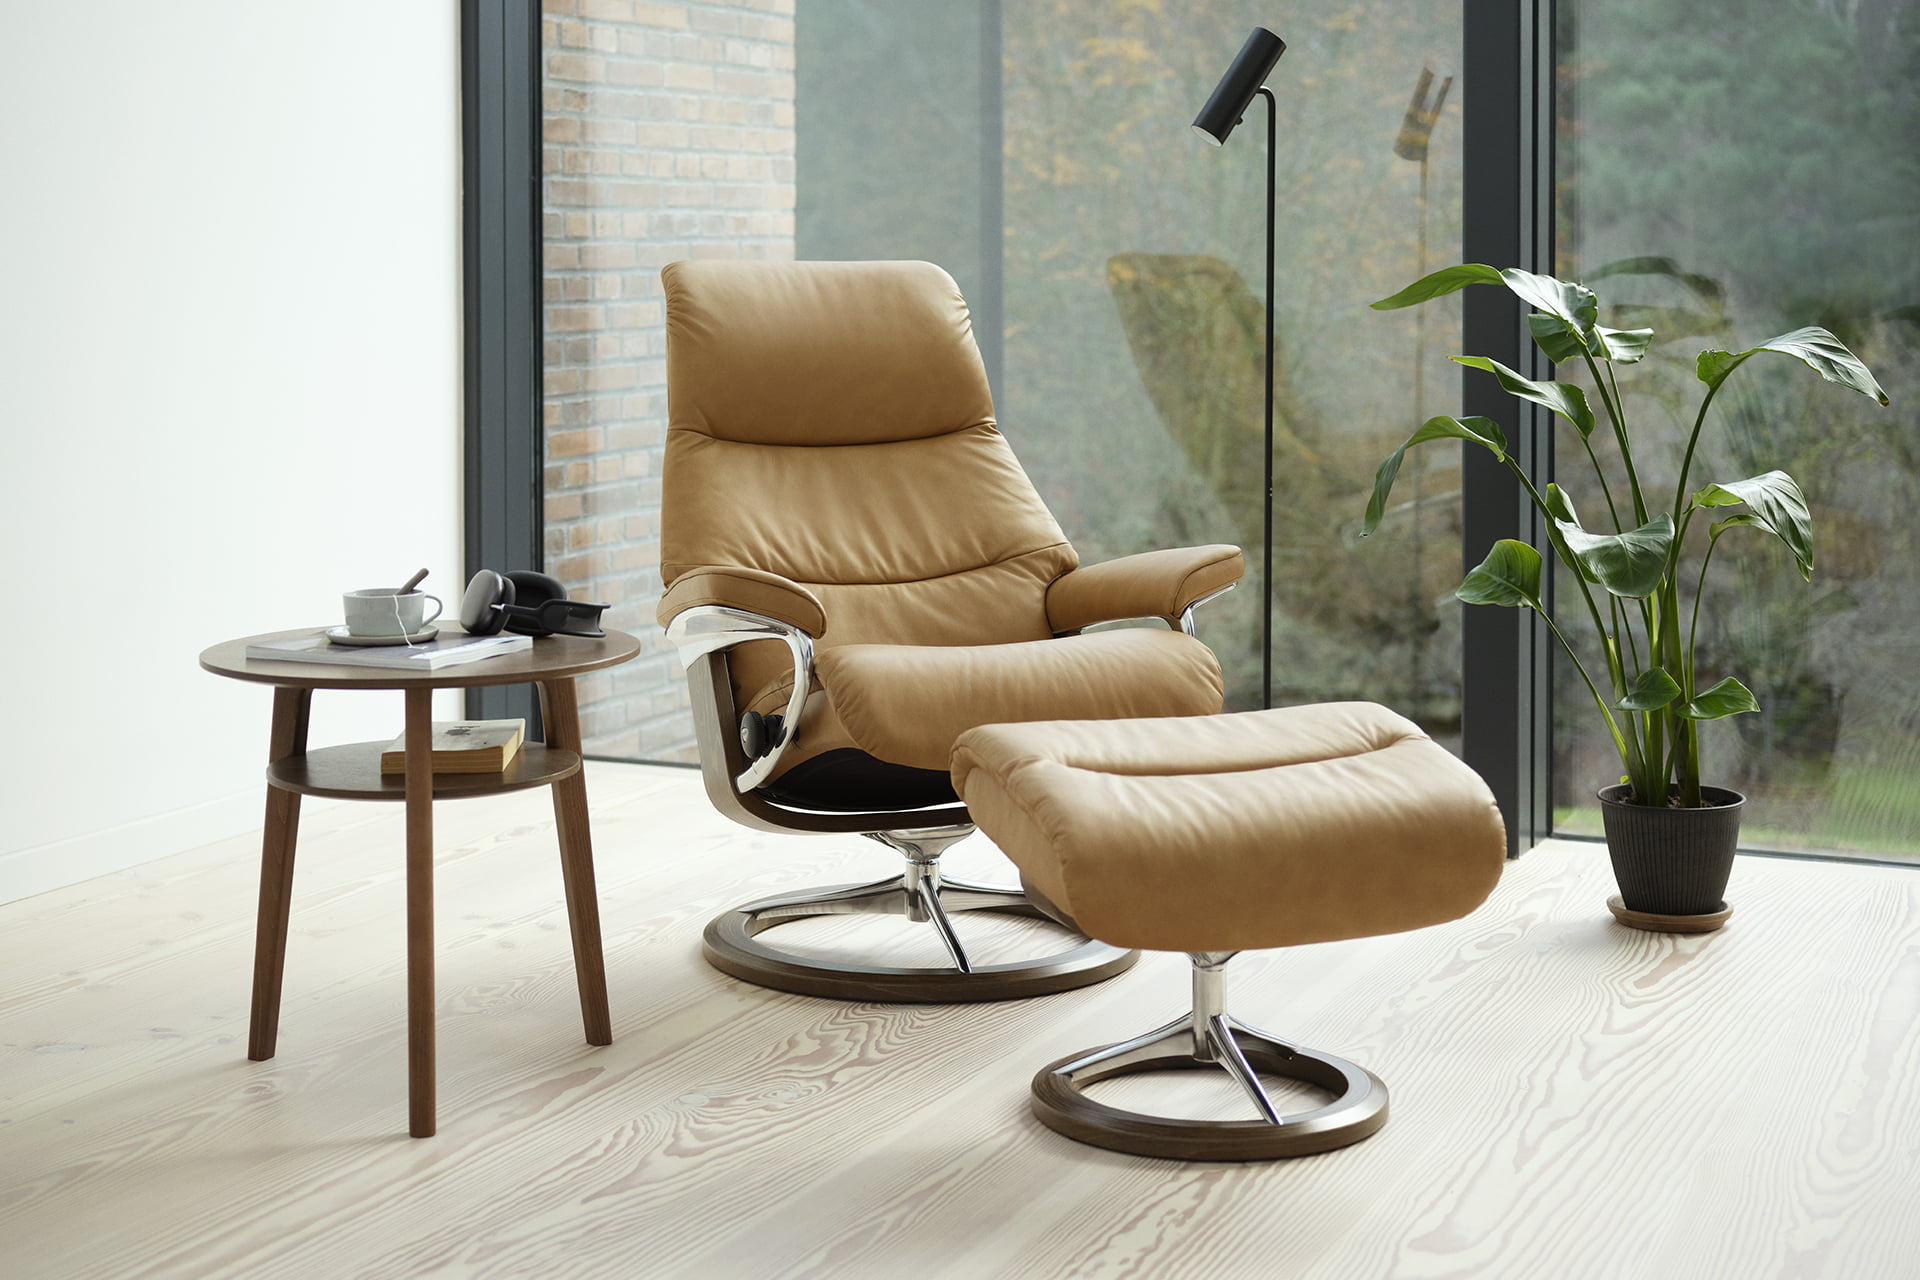 Stressless® View with a small round side-table in front of a large window